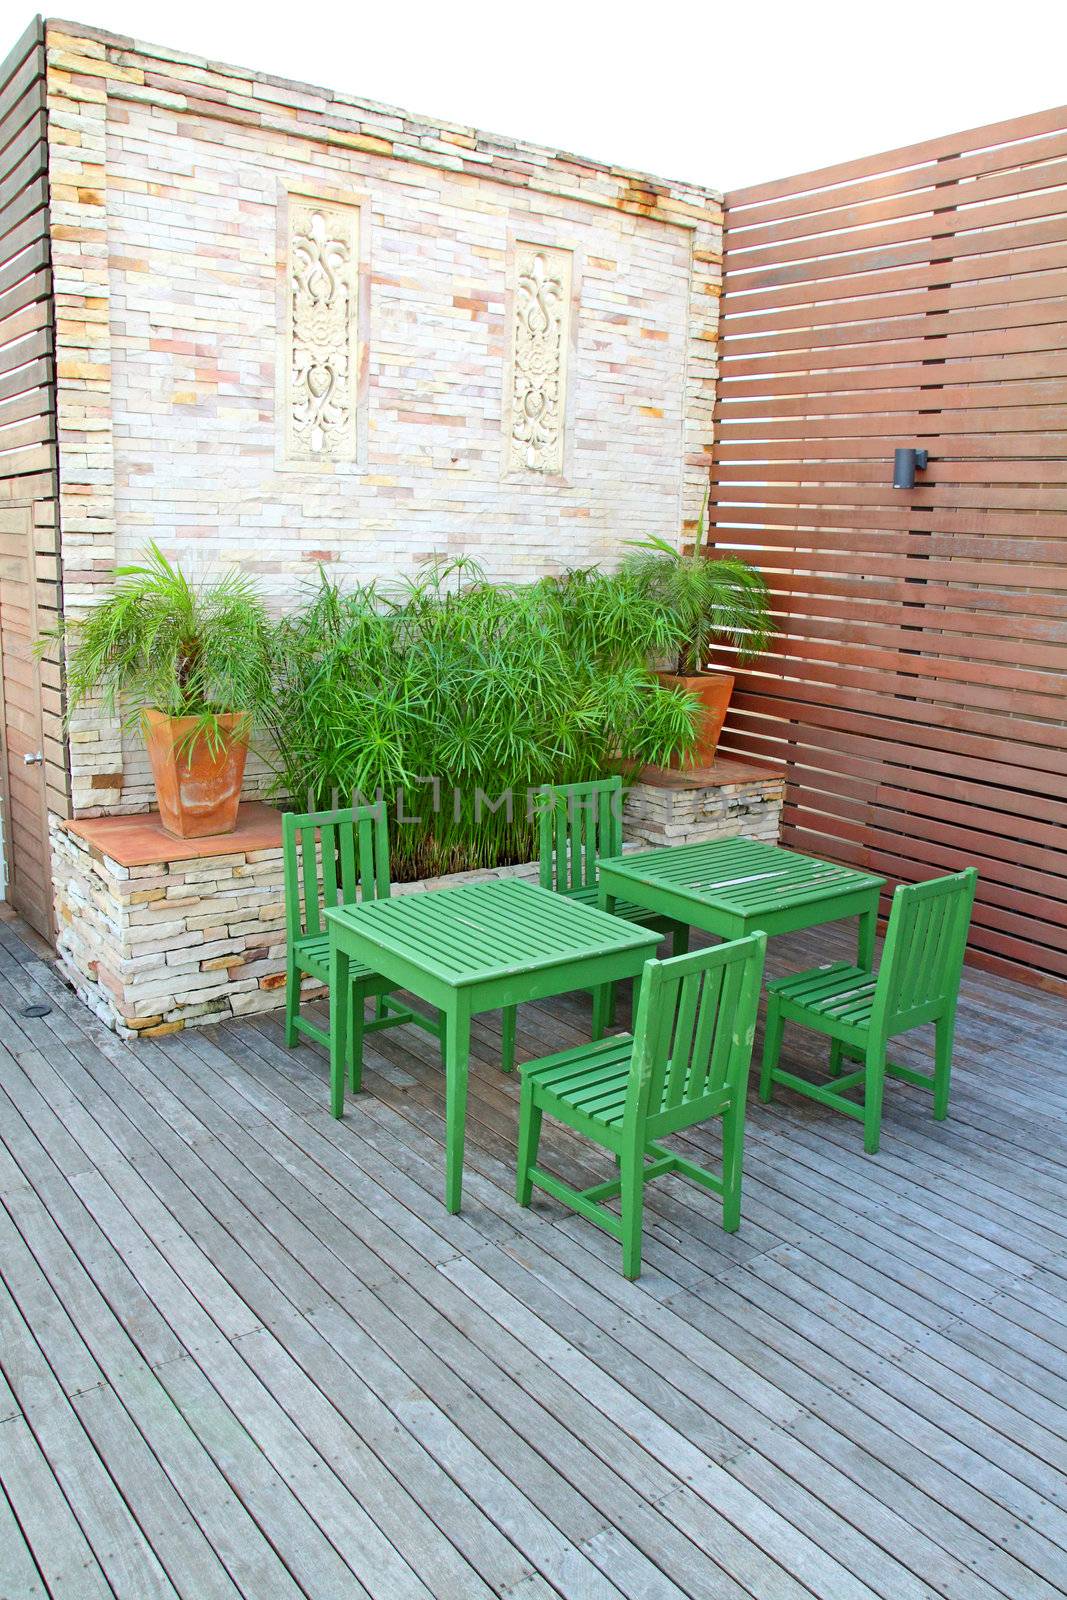 Green table setting on rooftop outdoor